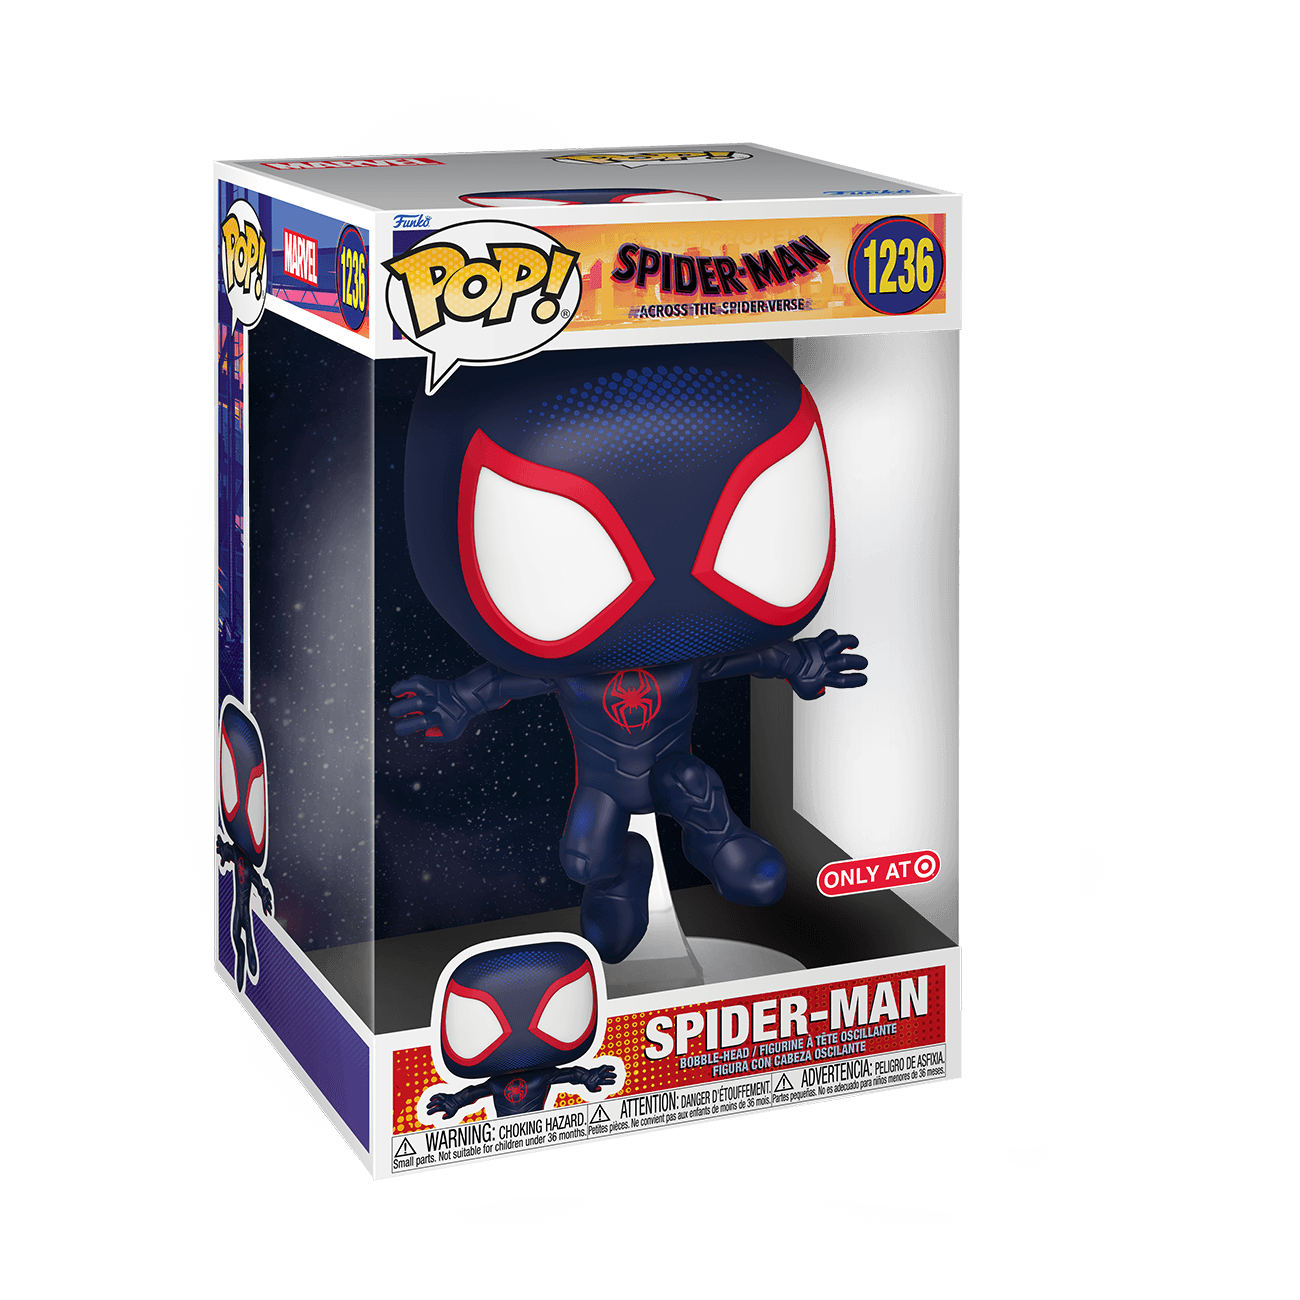 New 'Spider-Man: Across the Spider-Verse' Funko Pops Swing Into Stores |  Marvel